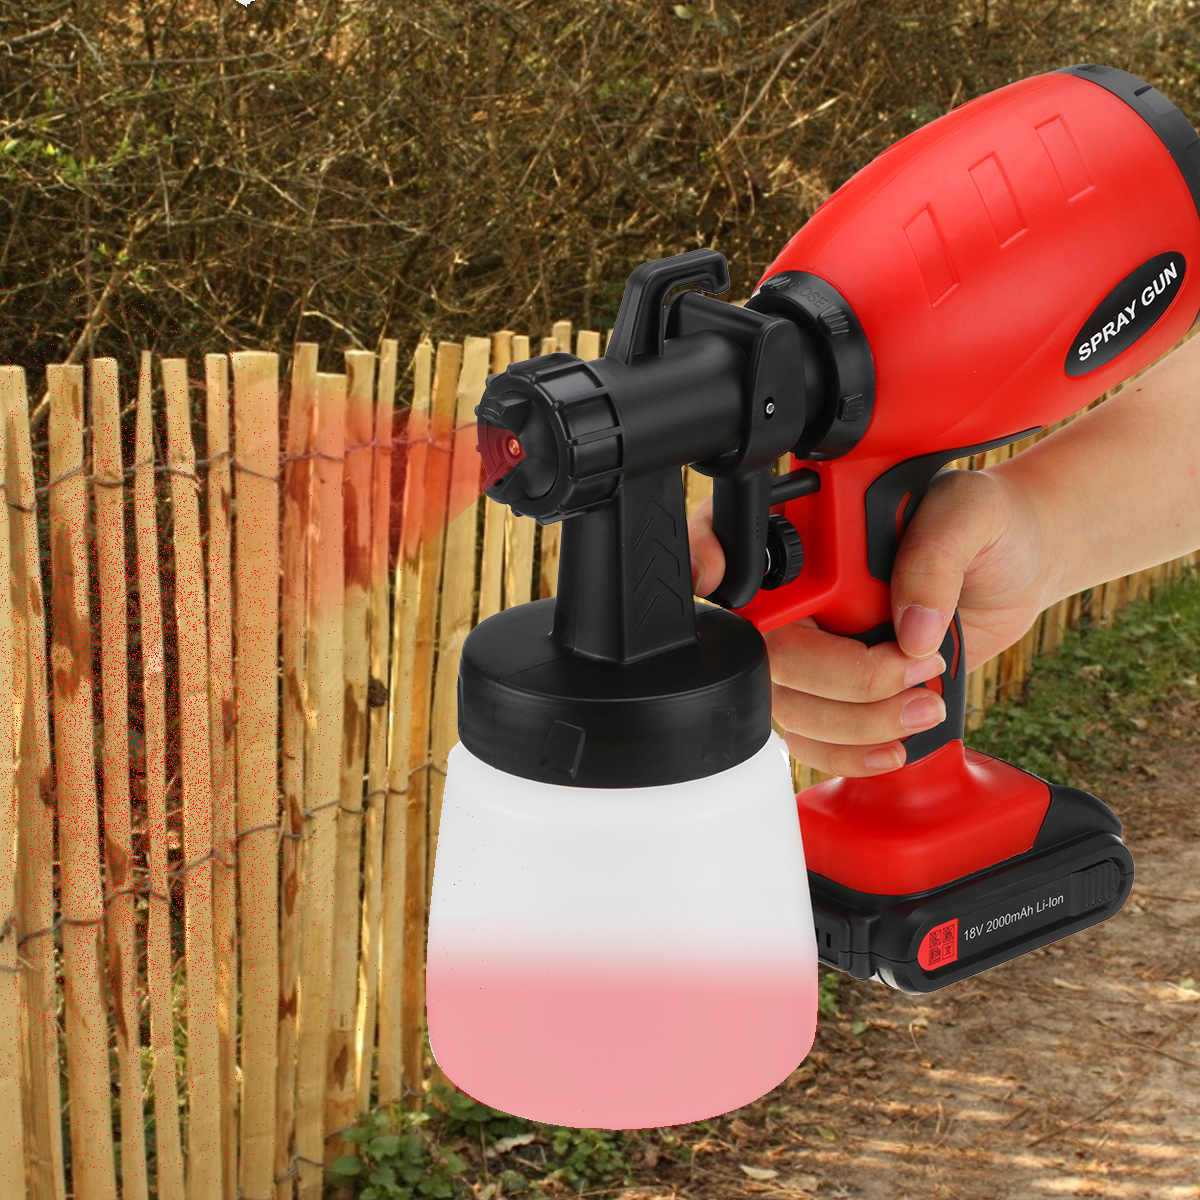 2000mAh-Portable-Electric-Paint-Sprayer-Wireless-Handheld-Spray-Guns-Home-Indoor-Fence-Painting-Tool-1851241-7